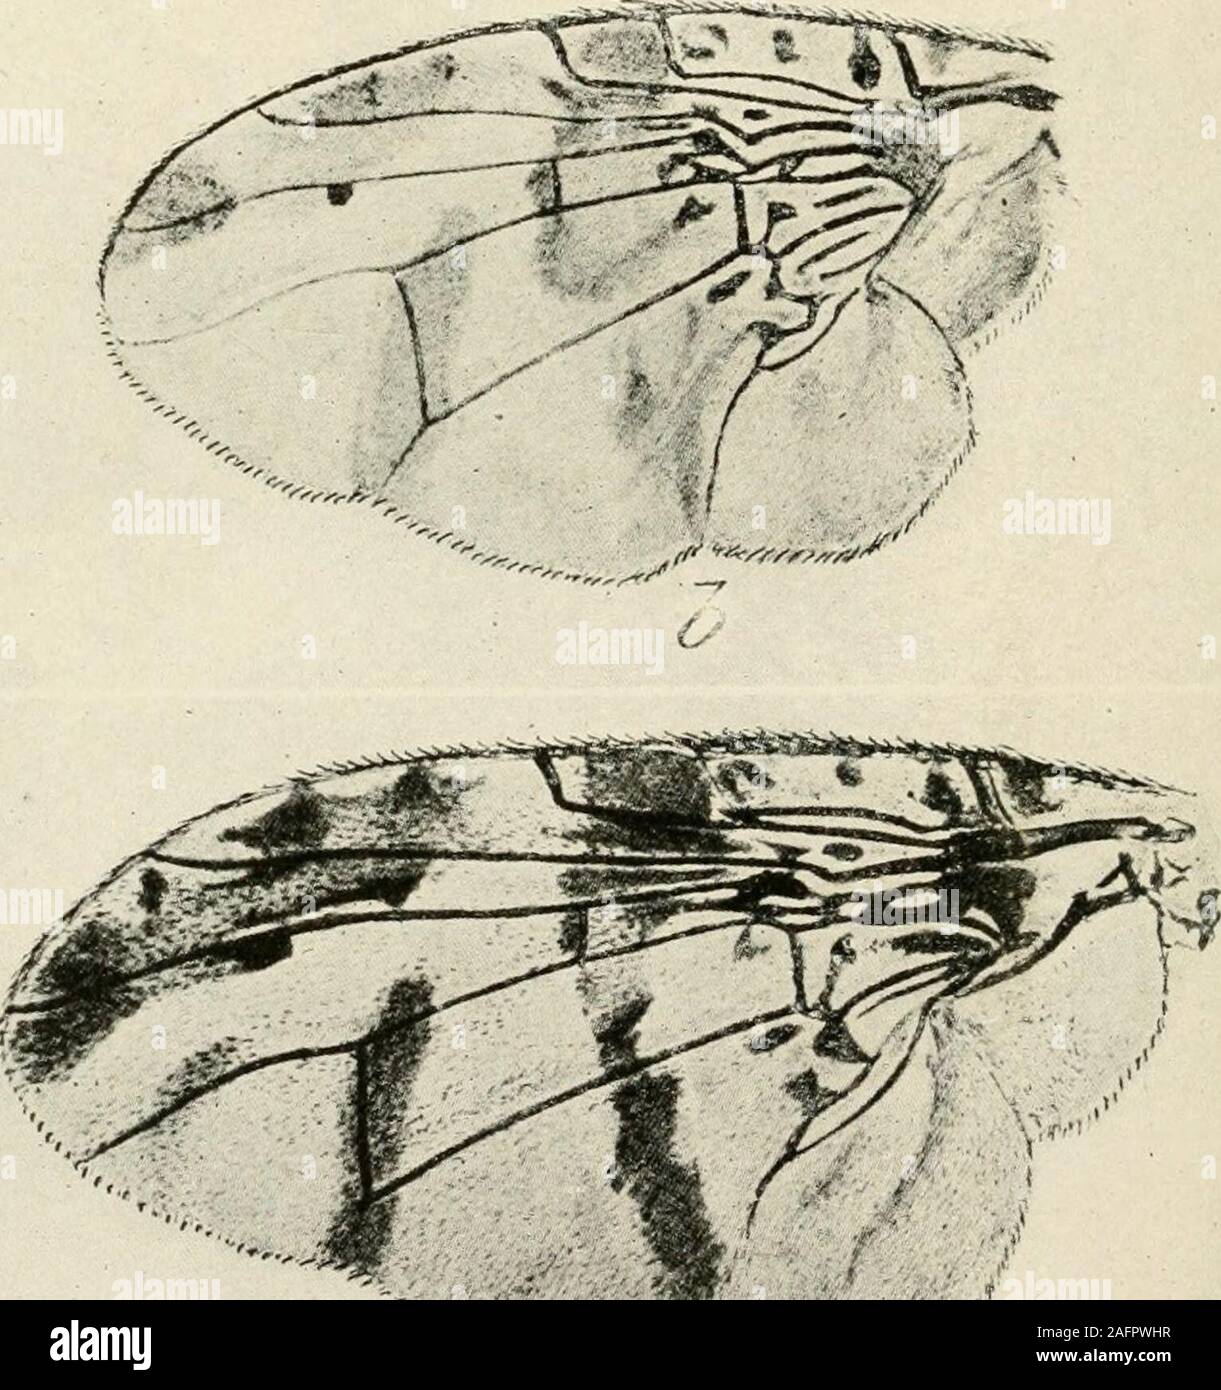 . A manual of dangerous insects likely to be introduced in the United States through importations. CZ. Wings of Fruit Flies. Fig. a.—Ceratitis striata. Fig. b.—Ceratitis capitata. Fig. c.—Ceratitis rubivora. (Froggatt.) FRUIT INSECTS, 113 long, of female 30 mm.; black striped with reddish gold; four pair of dorsal brushes,golden brown; pencils black, adorned with long variable hairs; warts white coveredwith golden hair; head grayish black with red collar; spring and summer broods.Eggs deposited in mass near pupal exuvium; overwinter. Distribution: Europe.Henschel, G. a. O. Die Schiidlichen Por Stock Photo